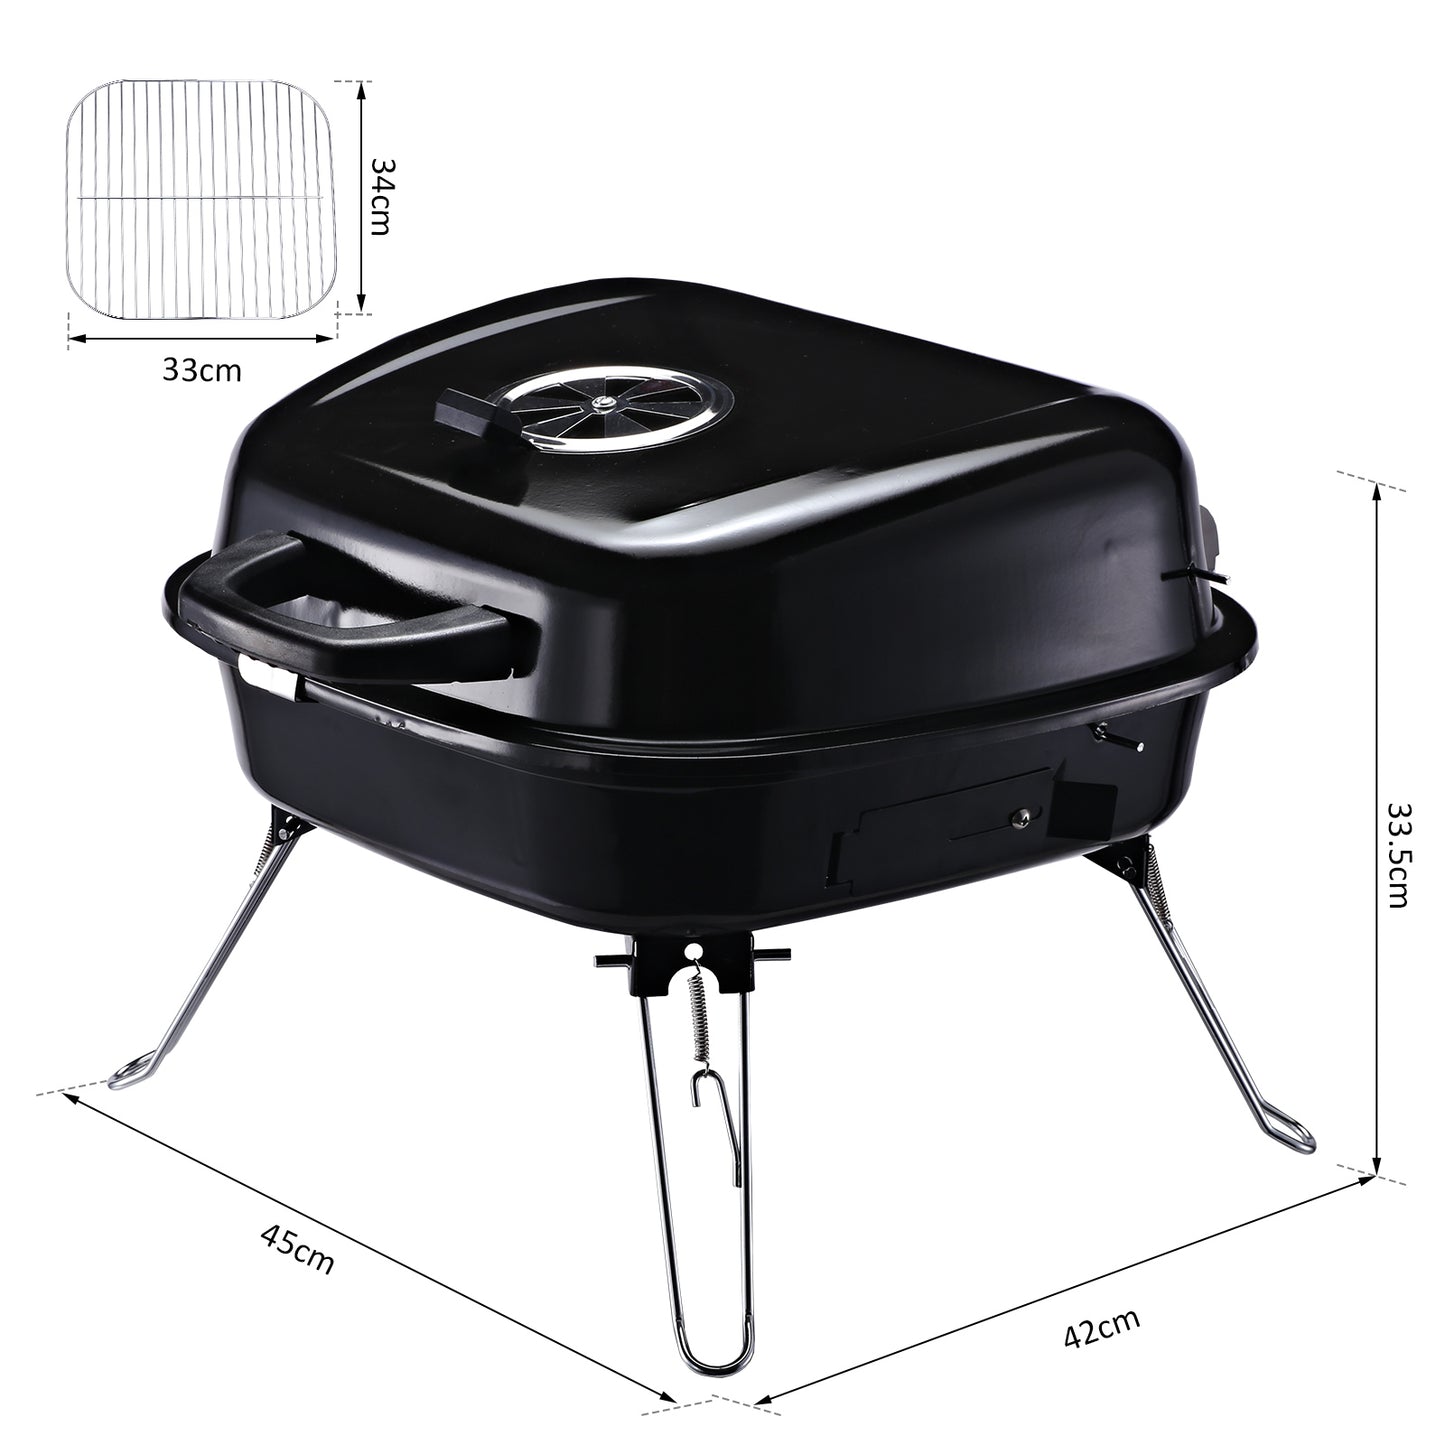 Outsunny Portable Charcoal BBQ Steel Iron Grill w/ Grid Black